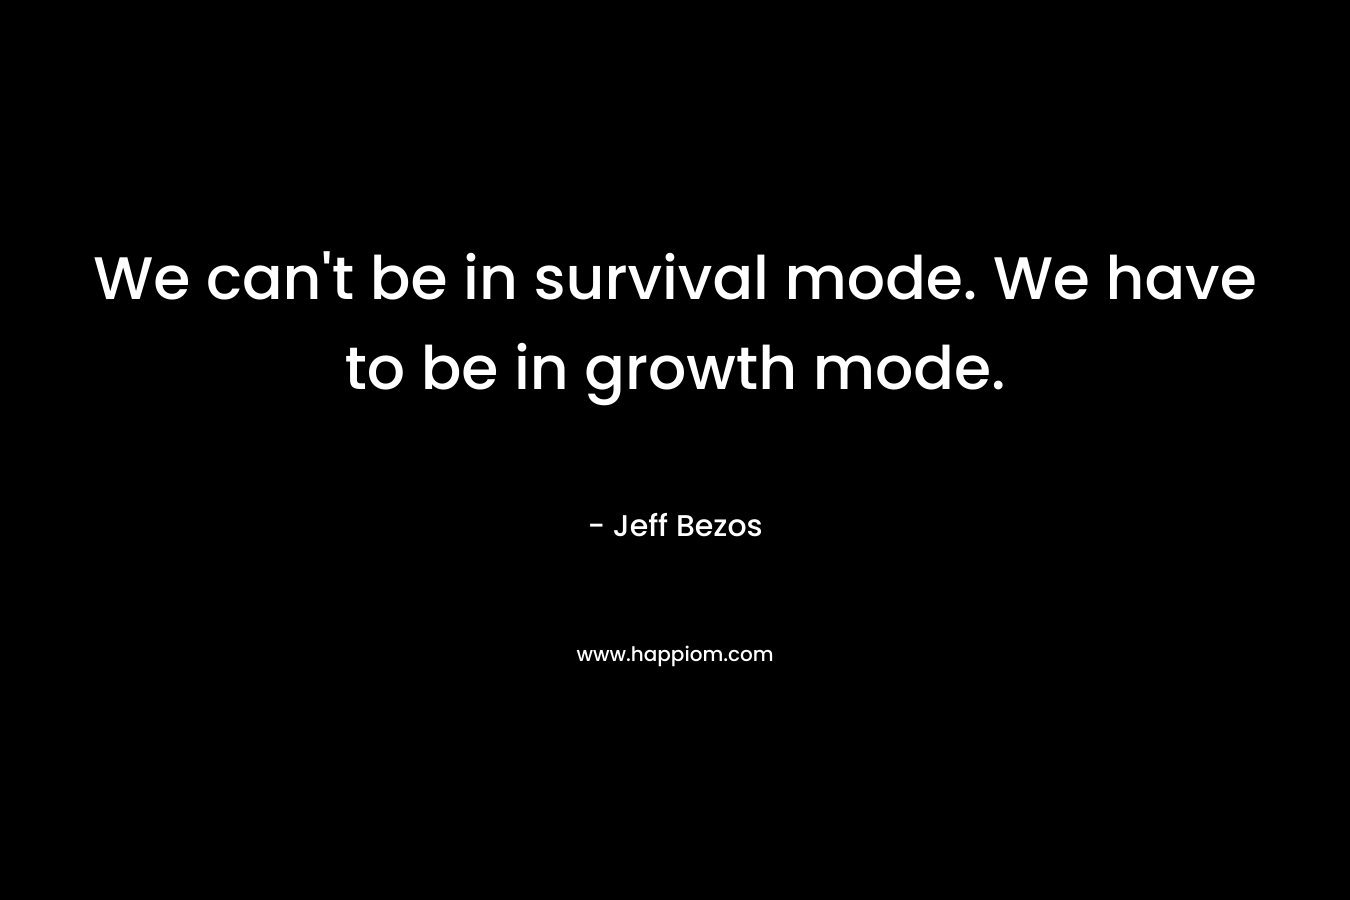 We can’t be in survival mode. We have to be in growth mode. – Jeff Bezos